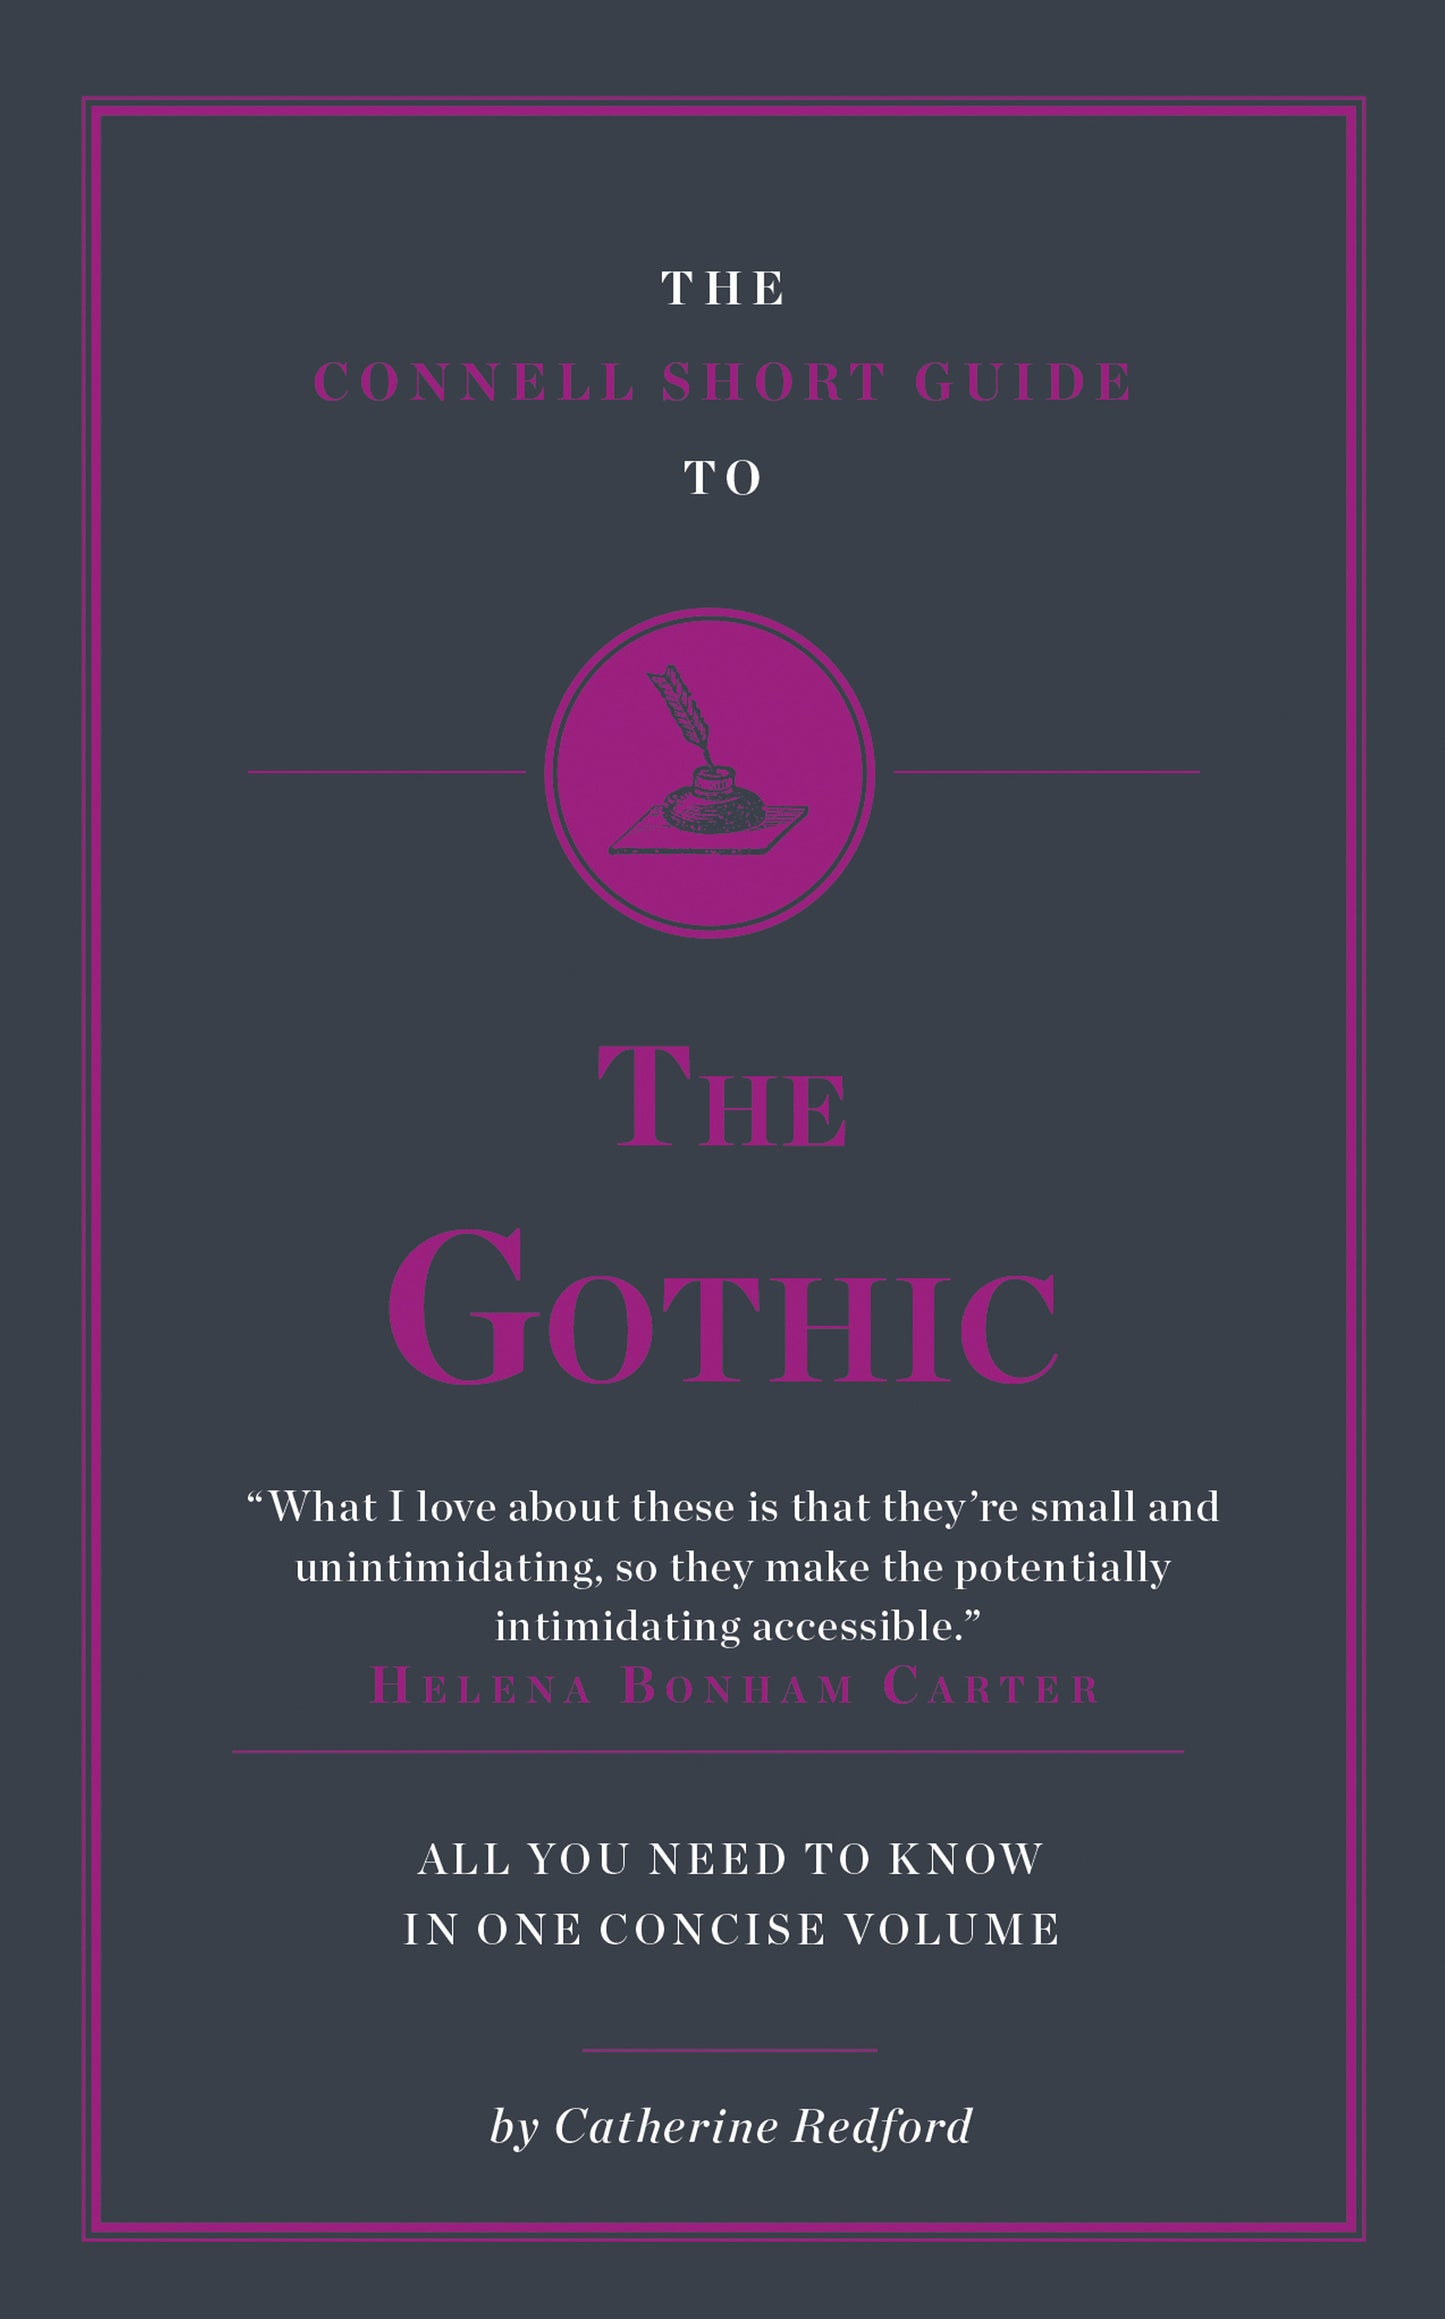 The Connell Guide to The Gothic - AVAILABLE NOW